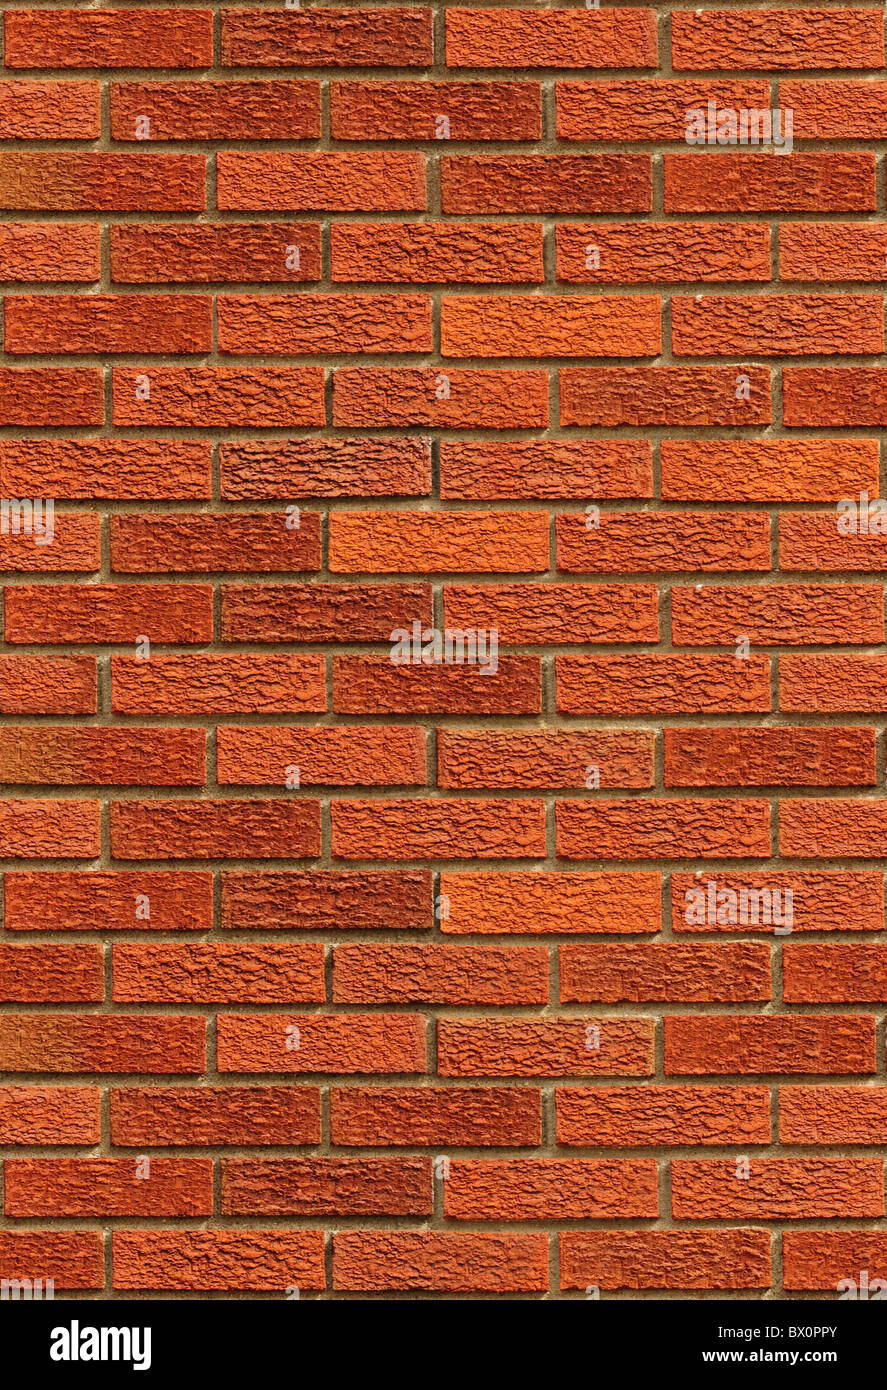 Seamless red brick wall background. The texture repeats seamlessly both vertically and horizontally. Stock Photo